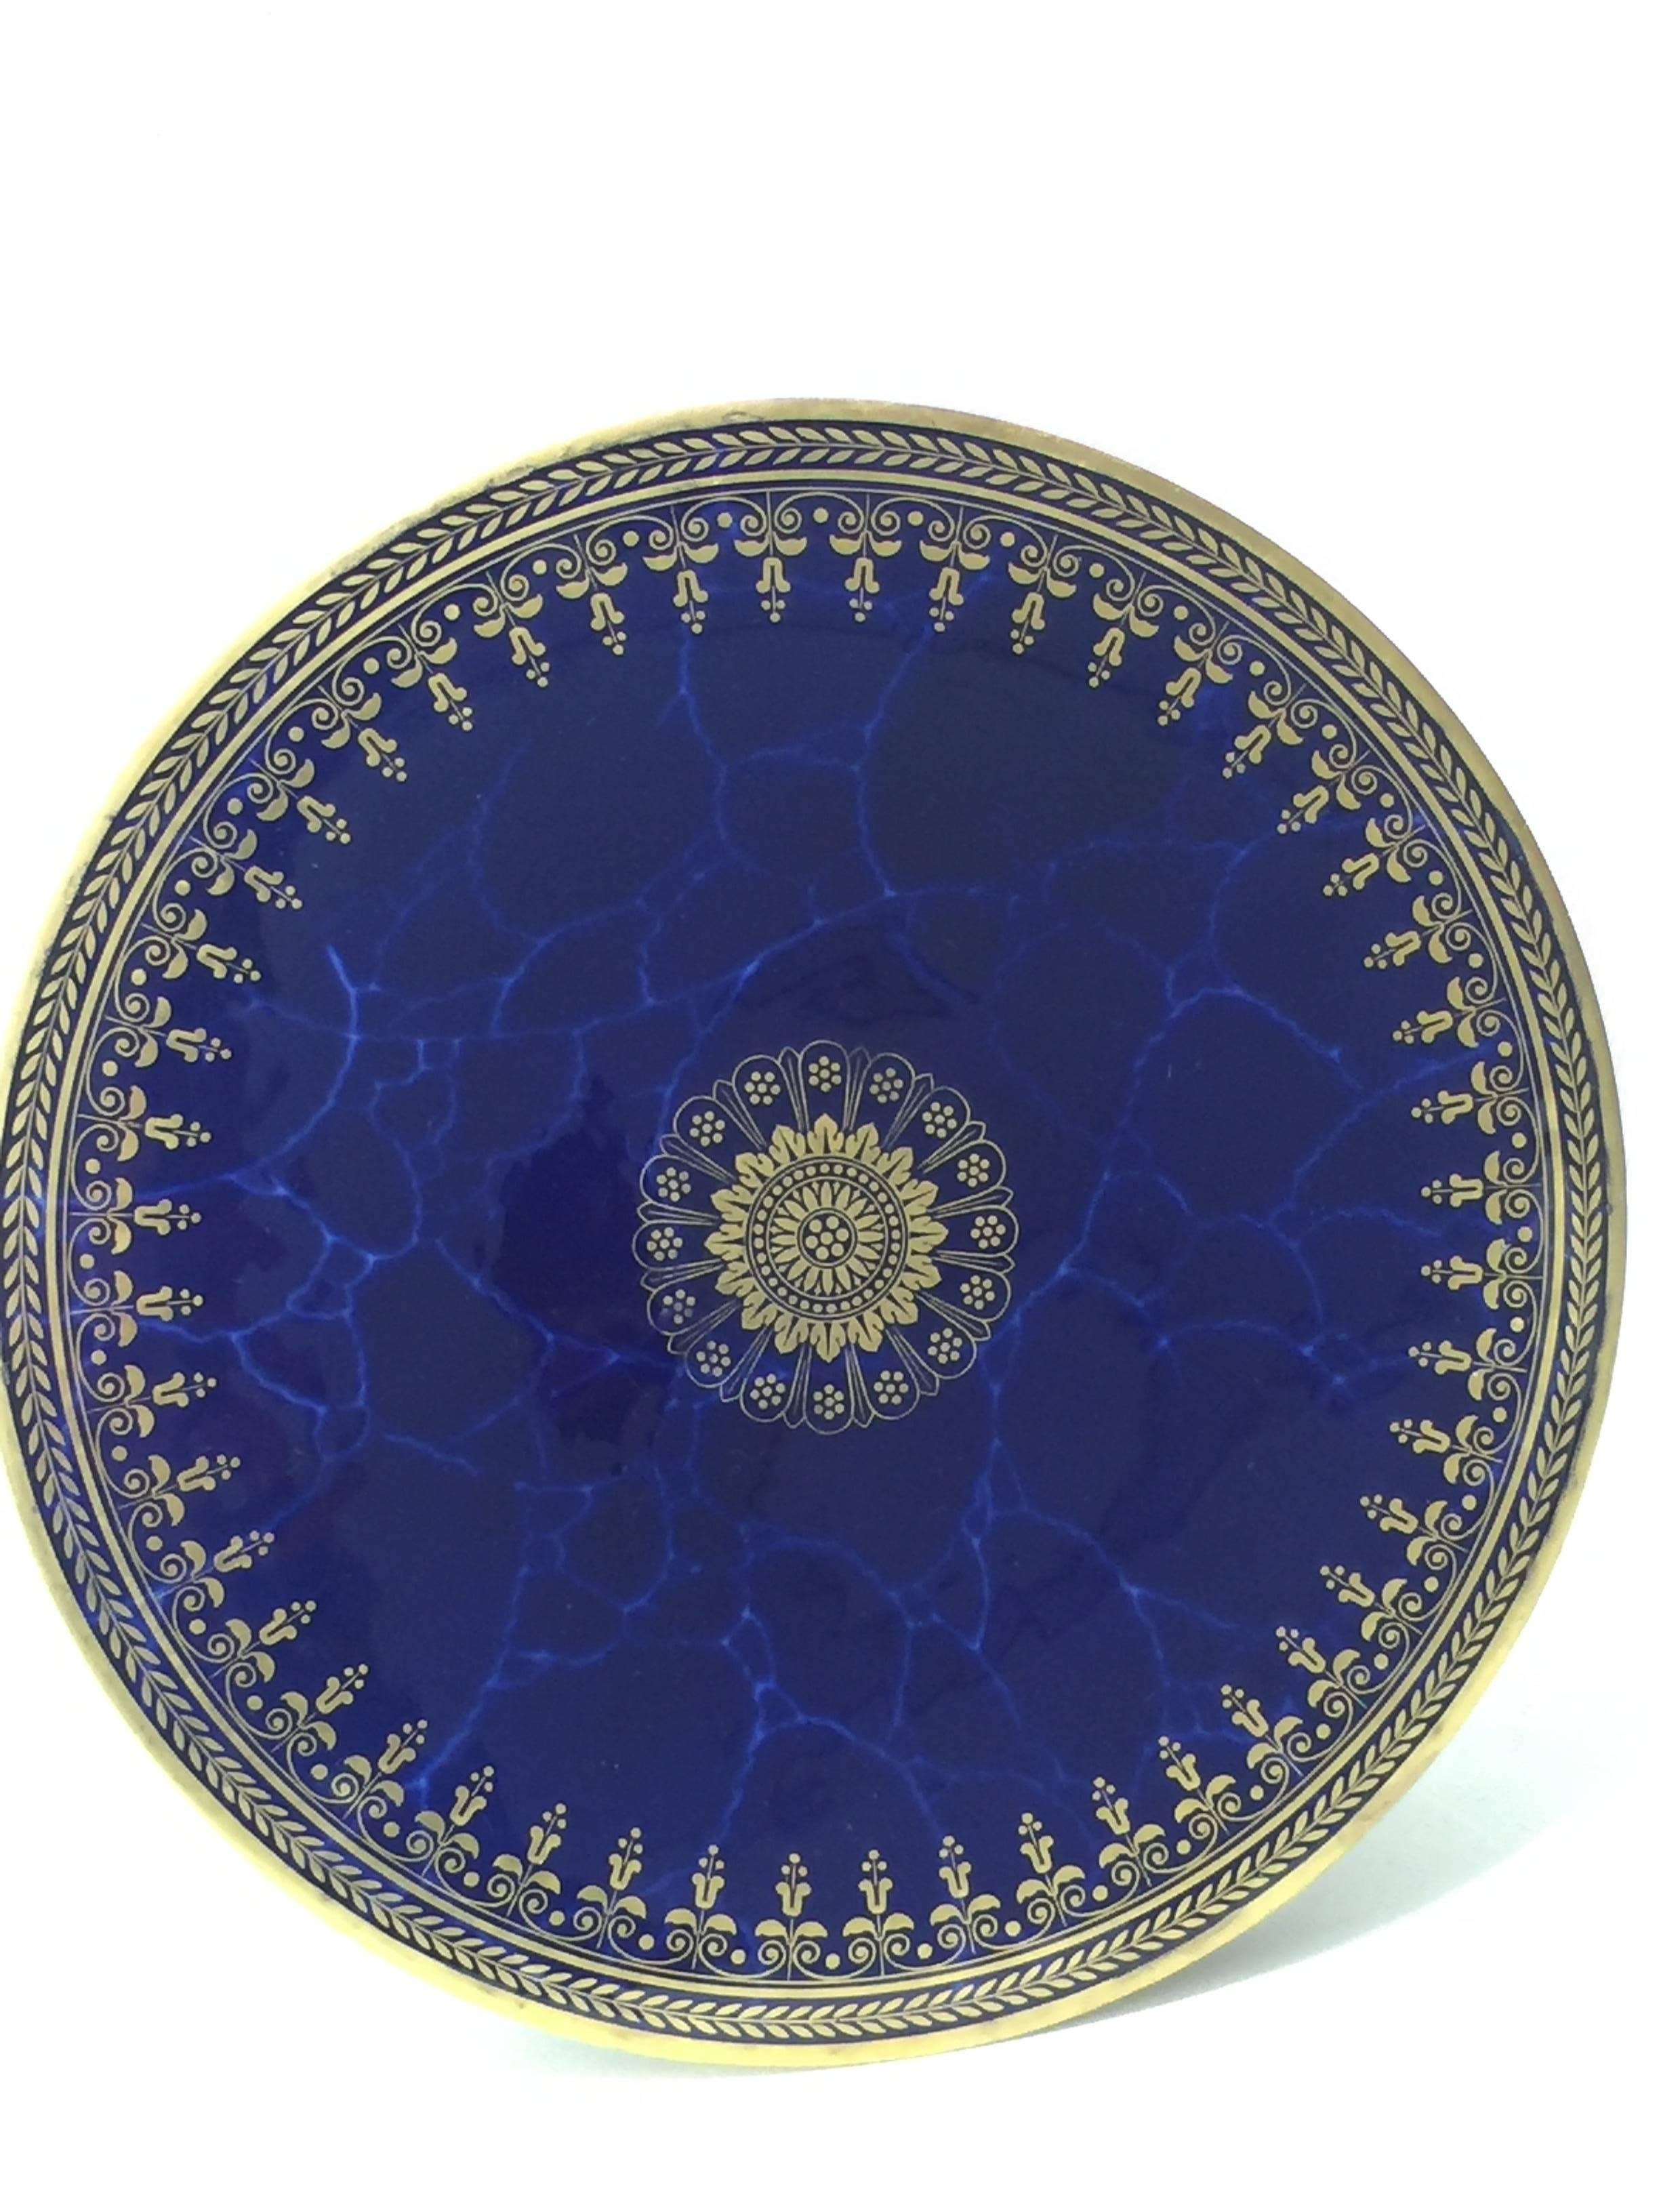 Neoclassical Revival Sevres Tazza or Plateau